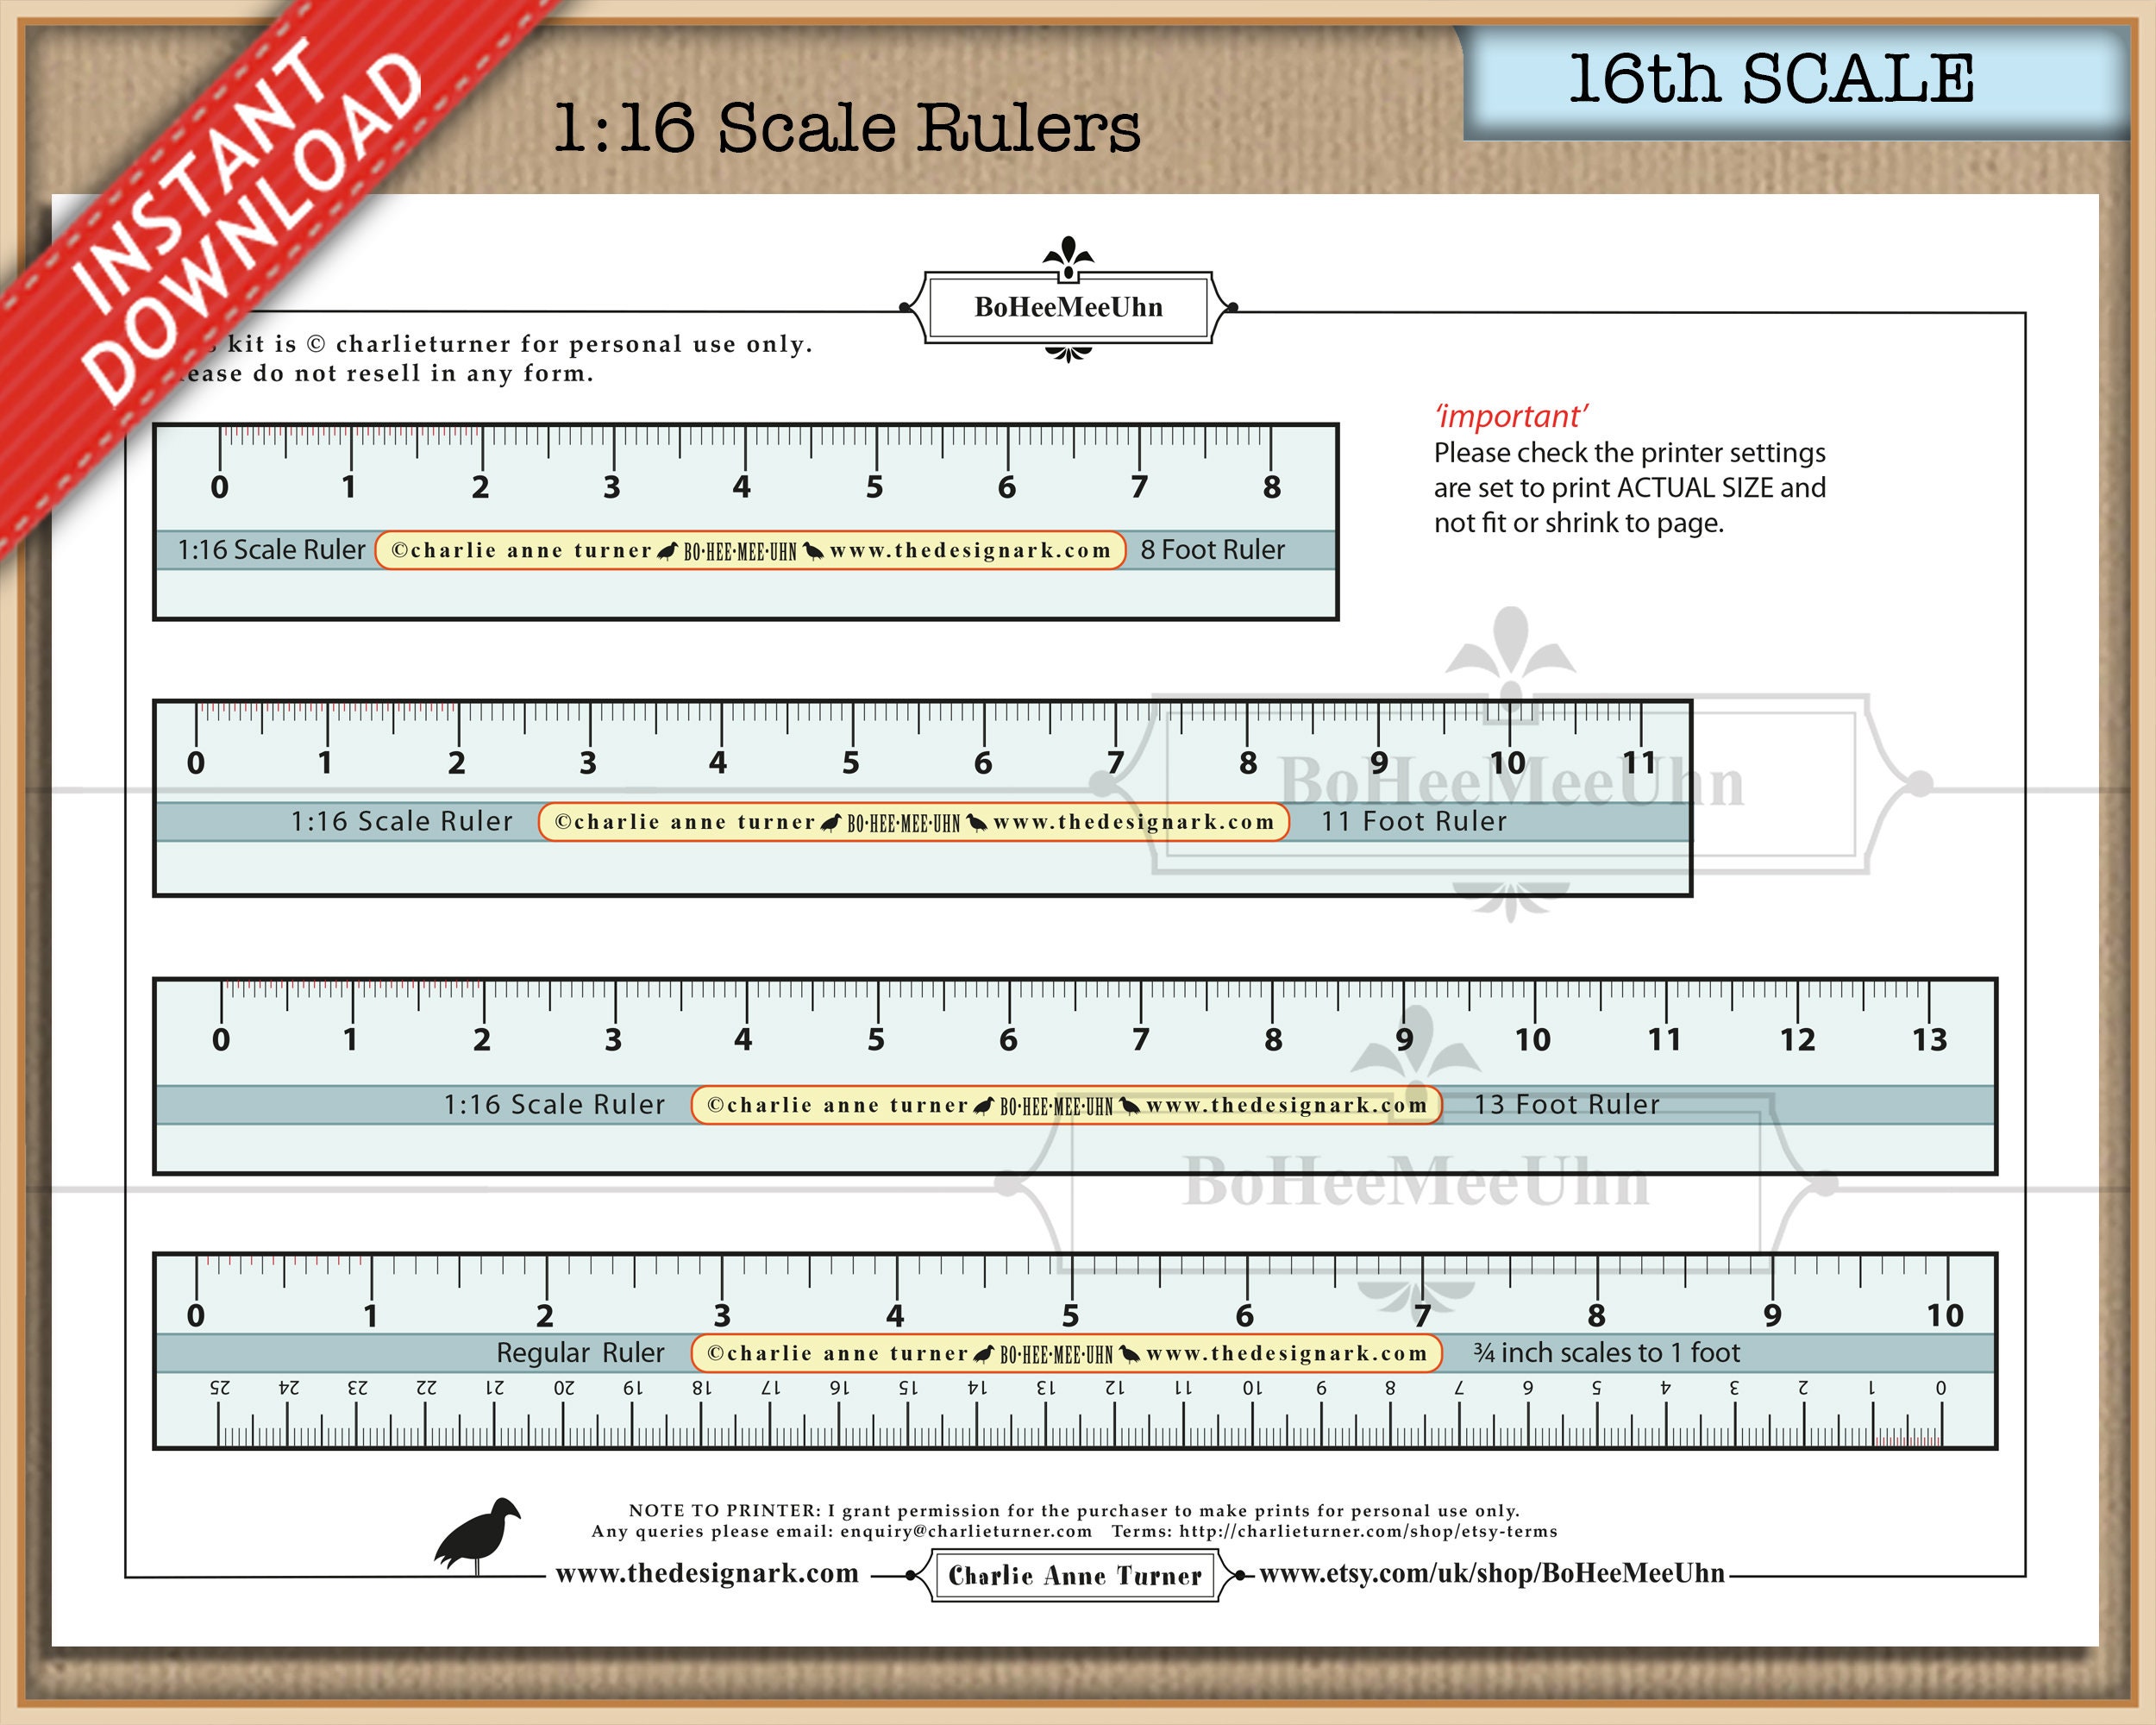 ruler-actual-size-printable-that-are-unusual-dans-blog-exceptional